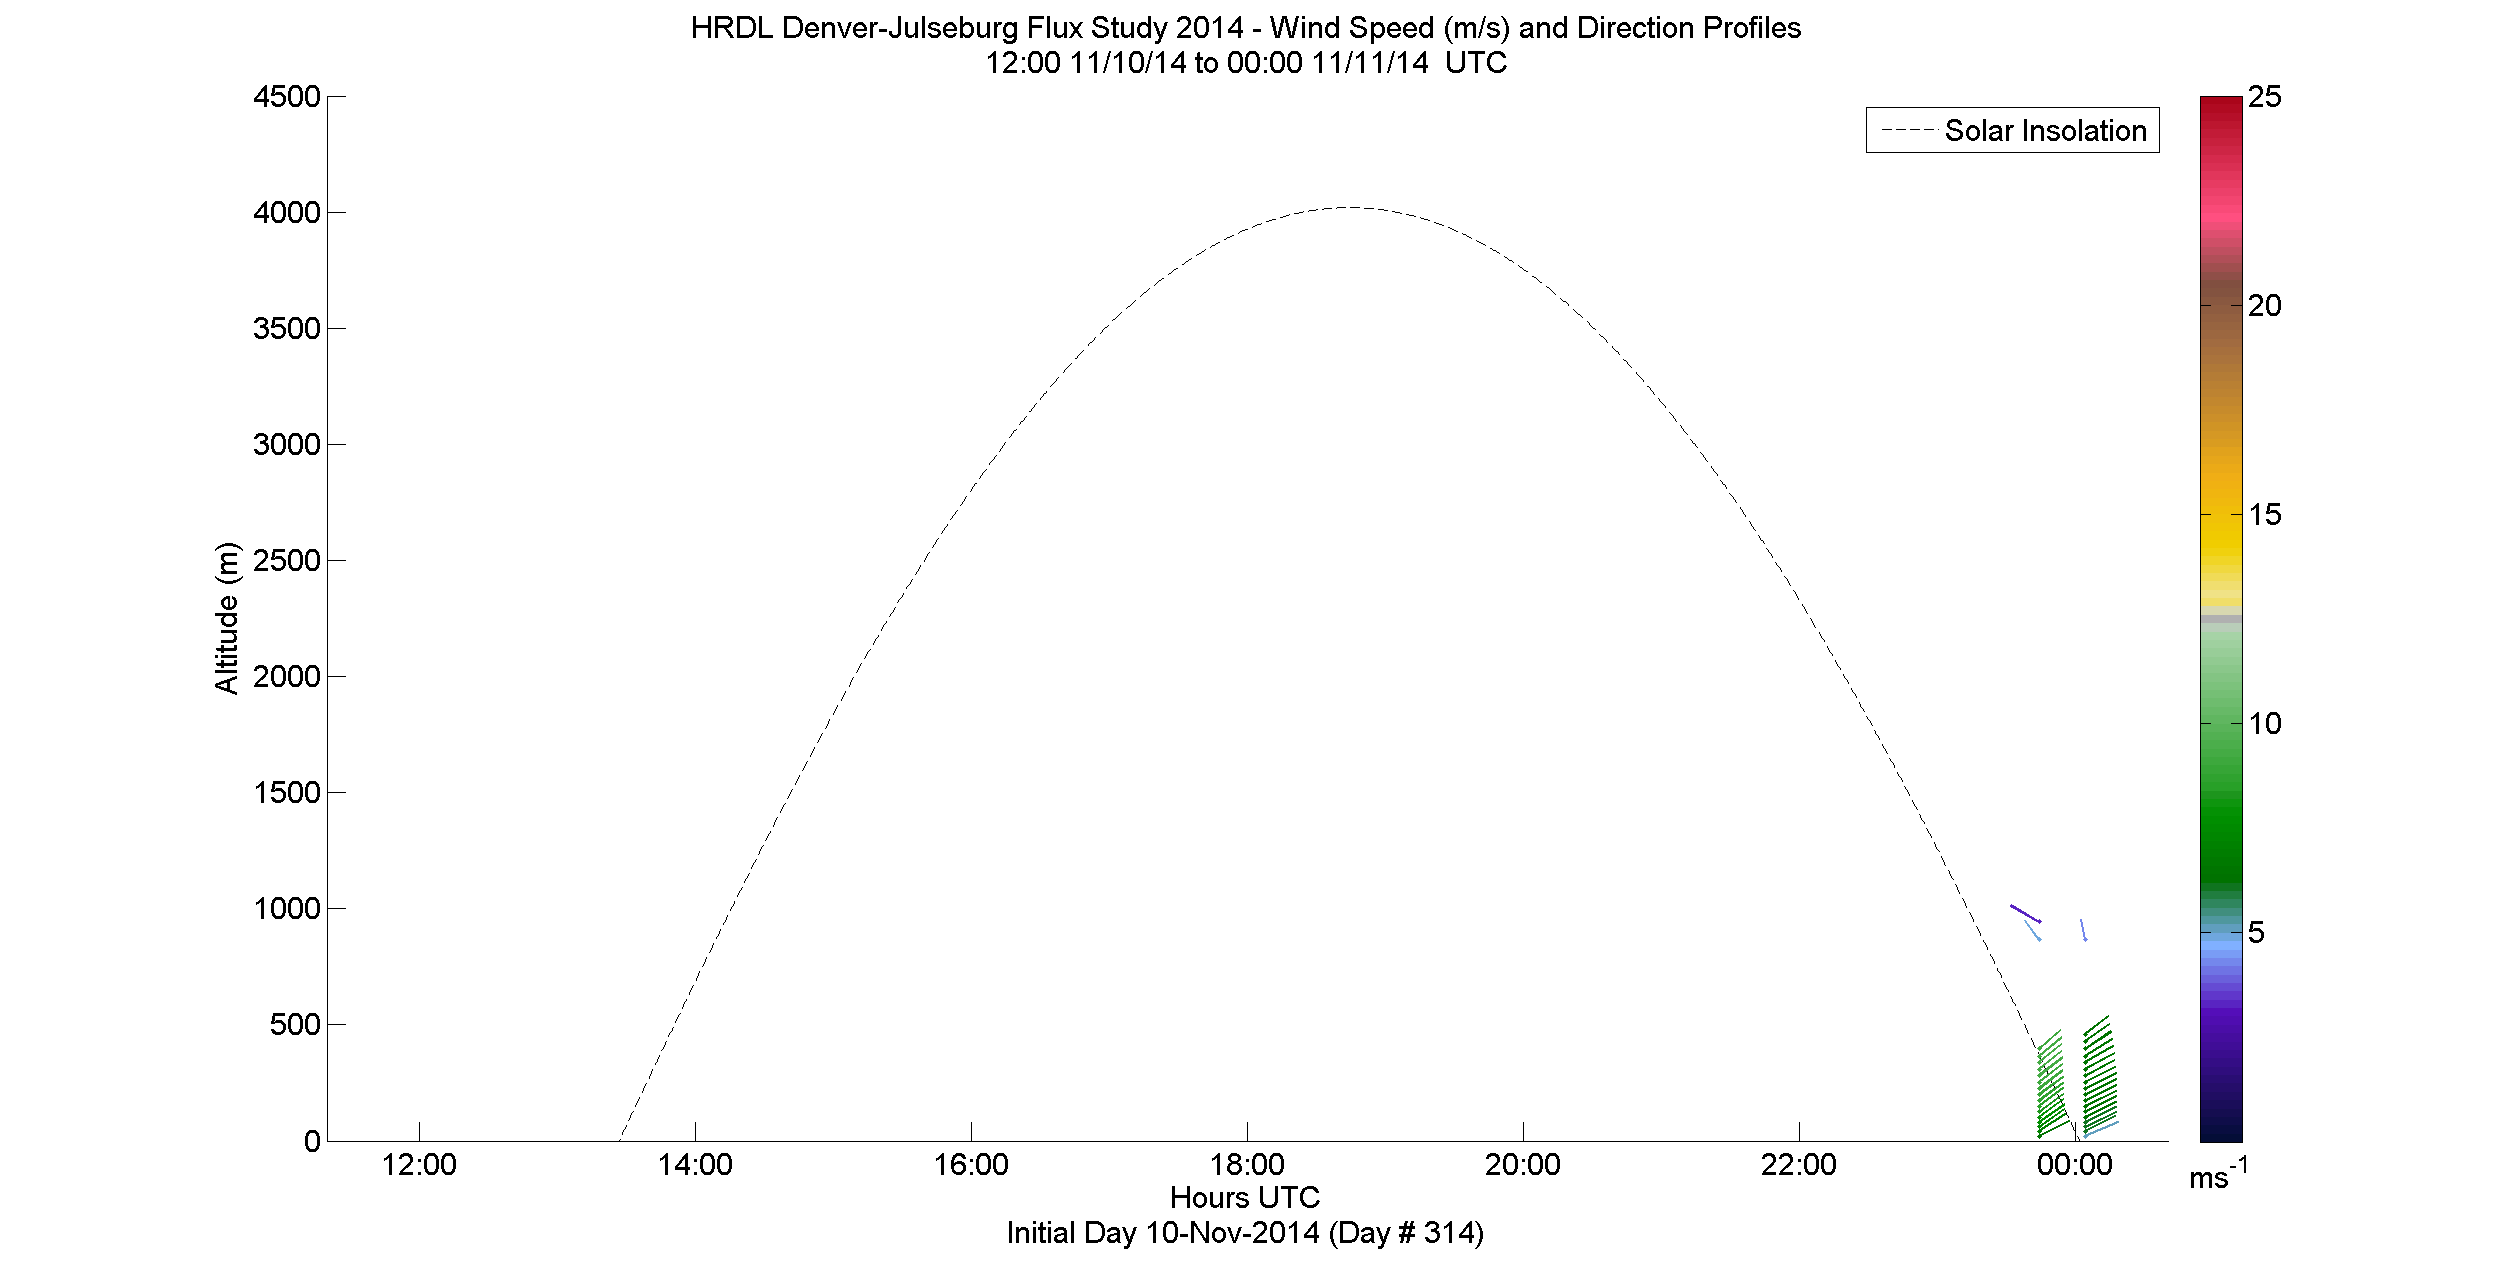 HRDL speed and direction profile - November 10 pm